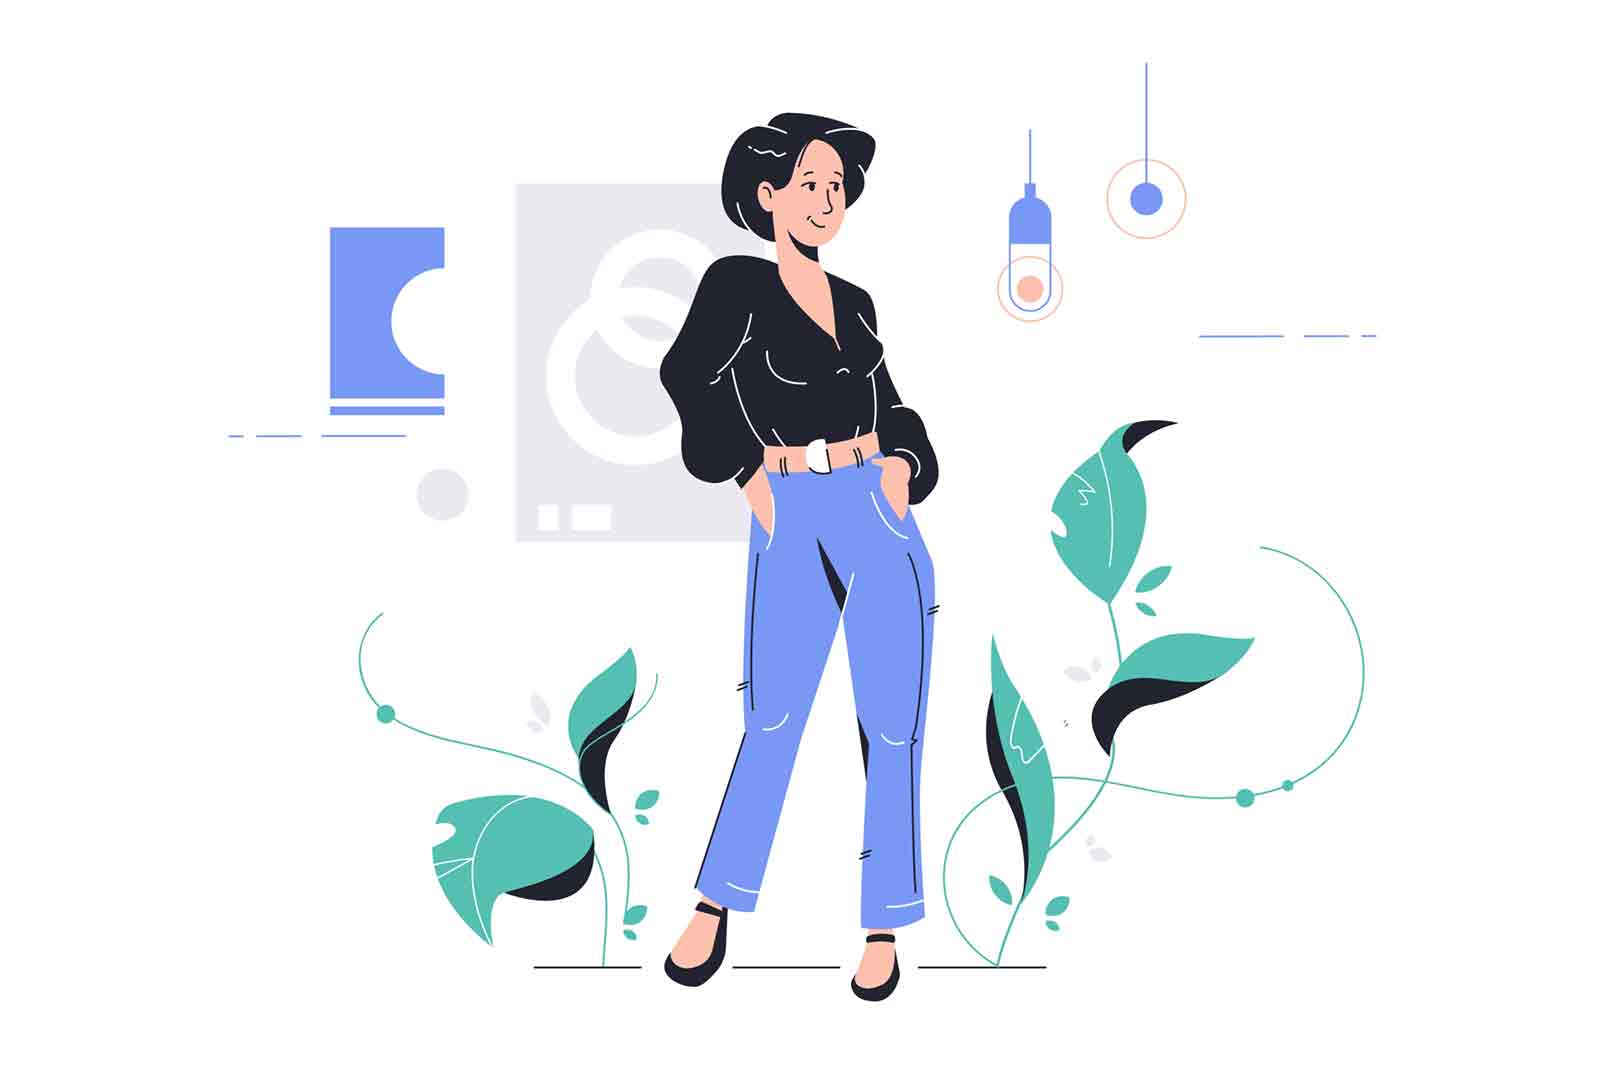 Smiling attractive young girl standing in modern room. Concept happy woman character with stylish clothes of jeans and black top posing in shop. Vector illustration.